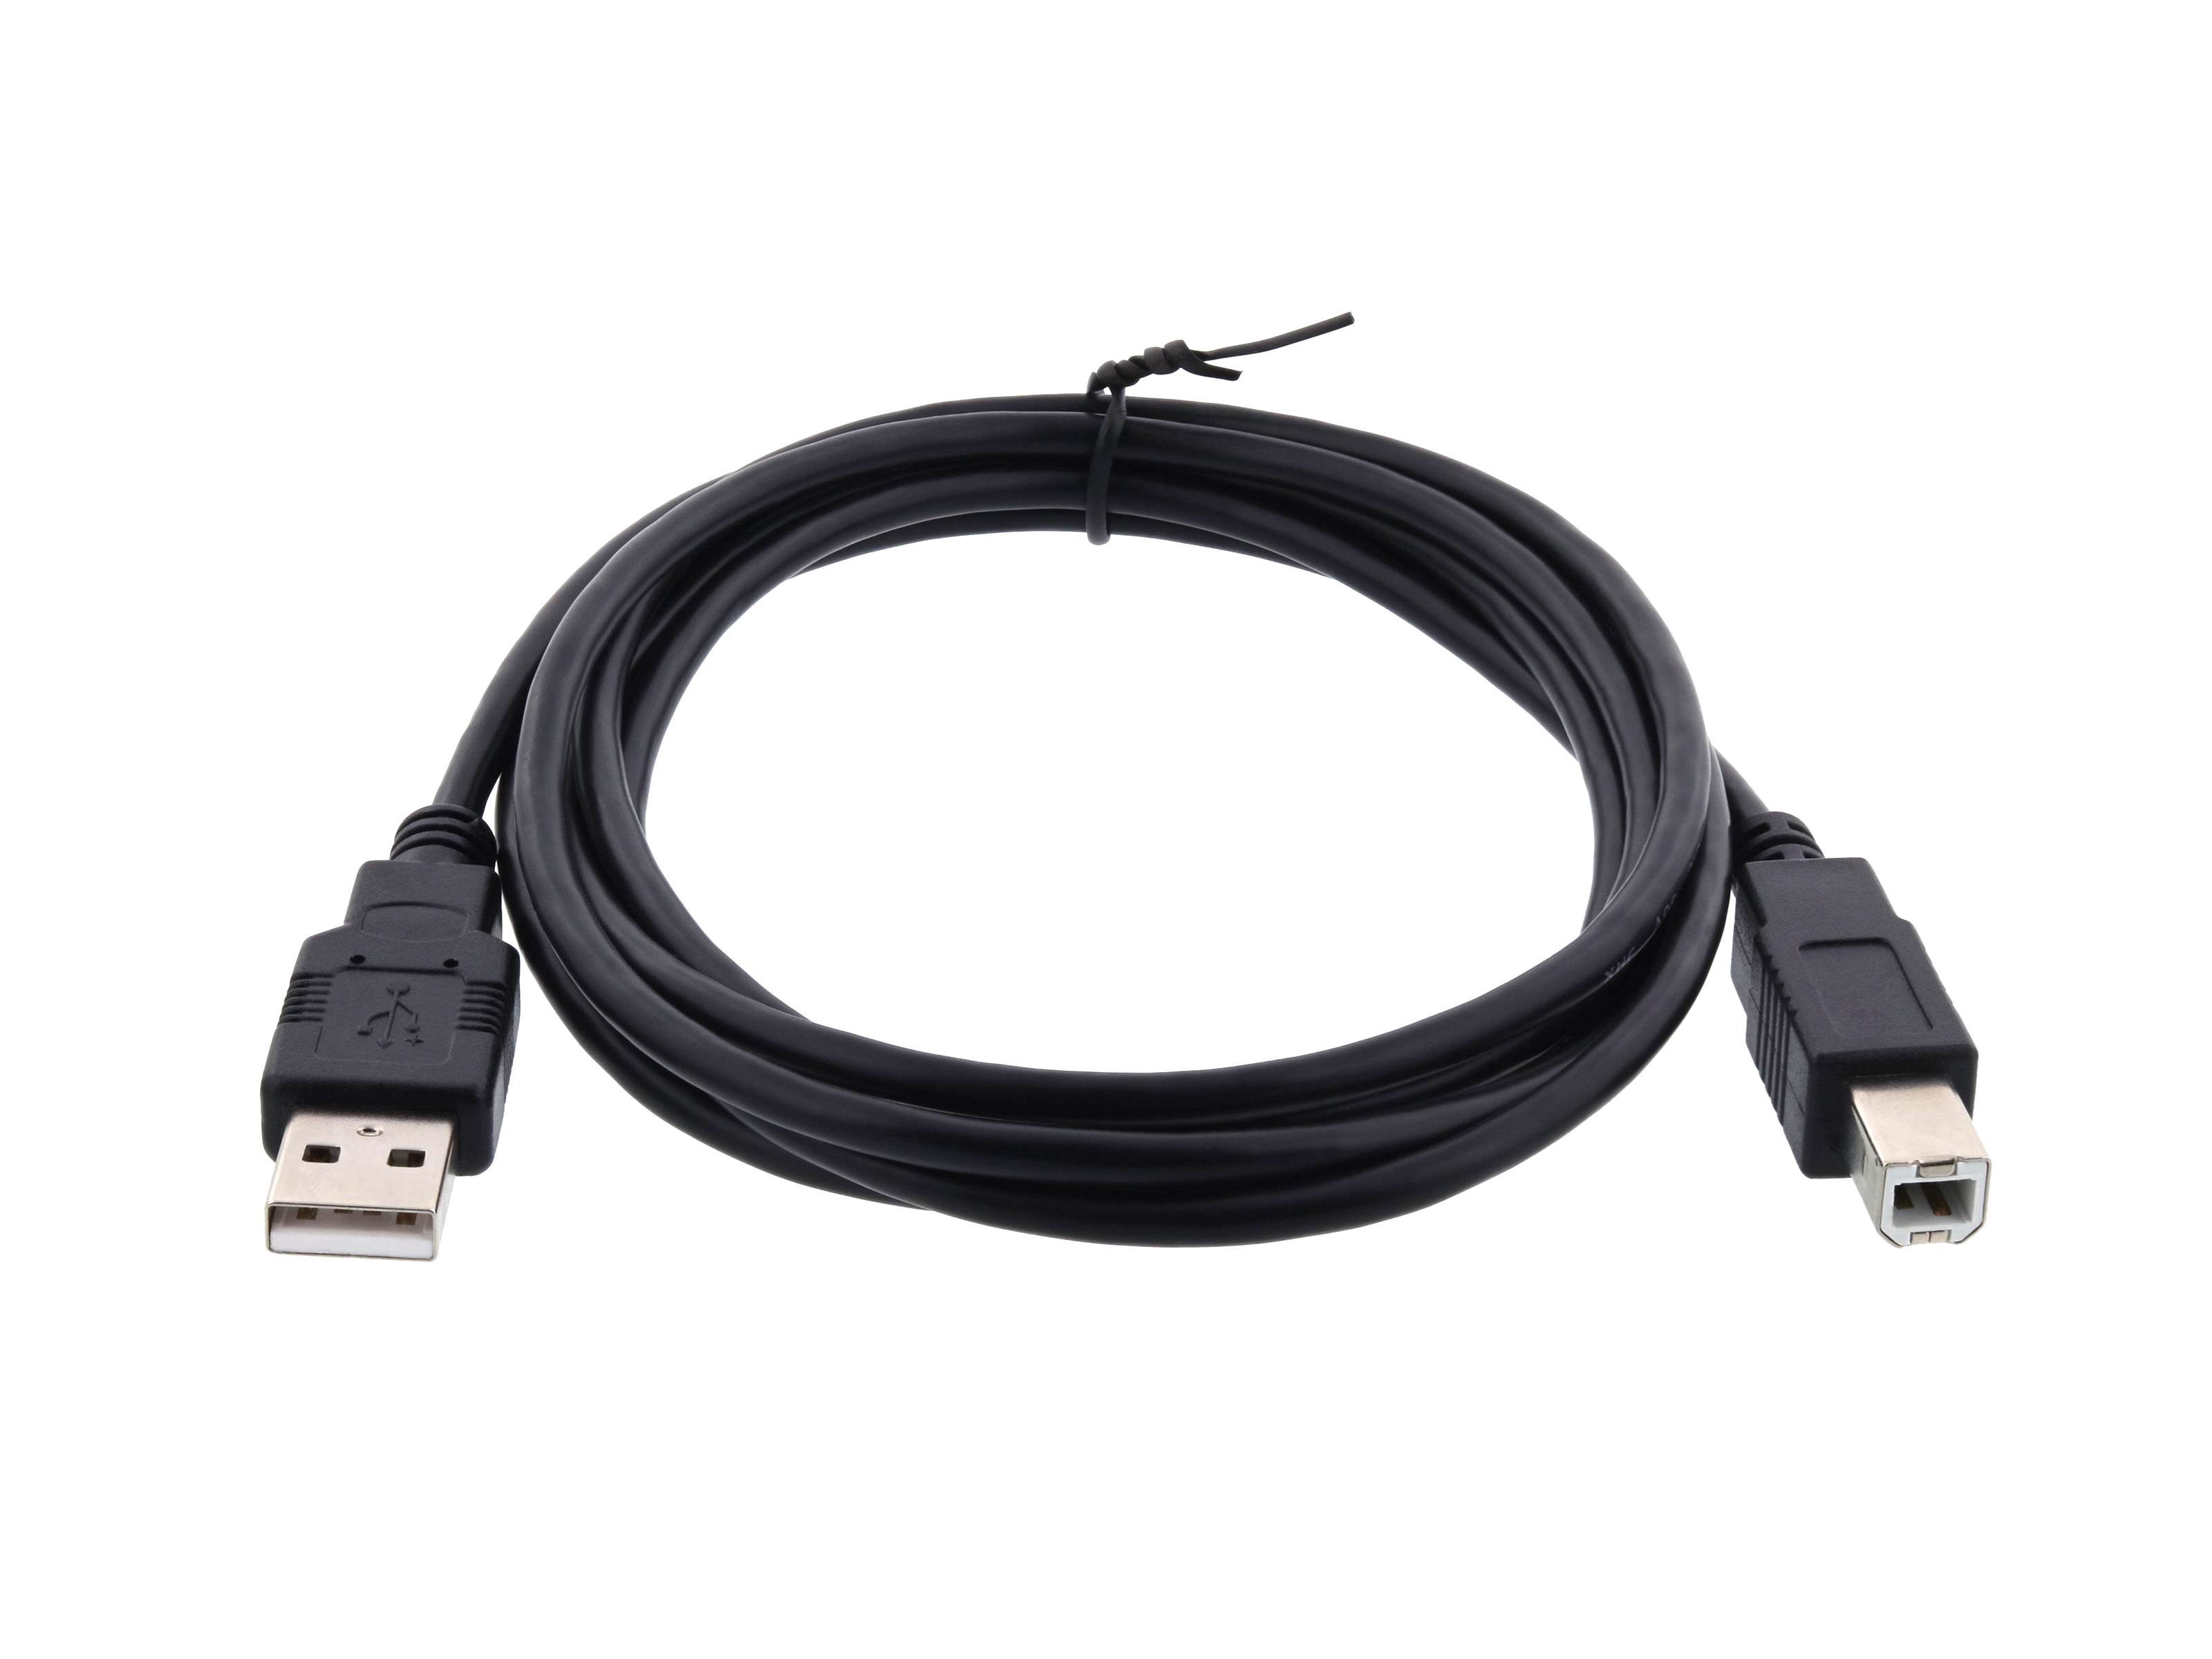 USB 2.0 Cable A to B M/M - 6 FT For PC or Mac